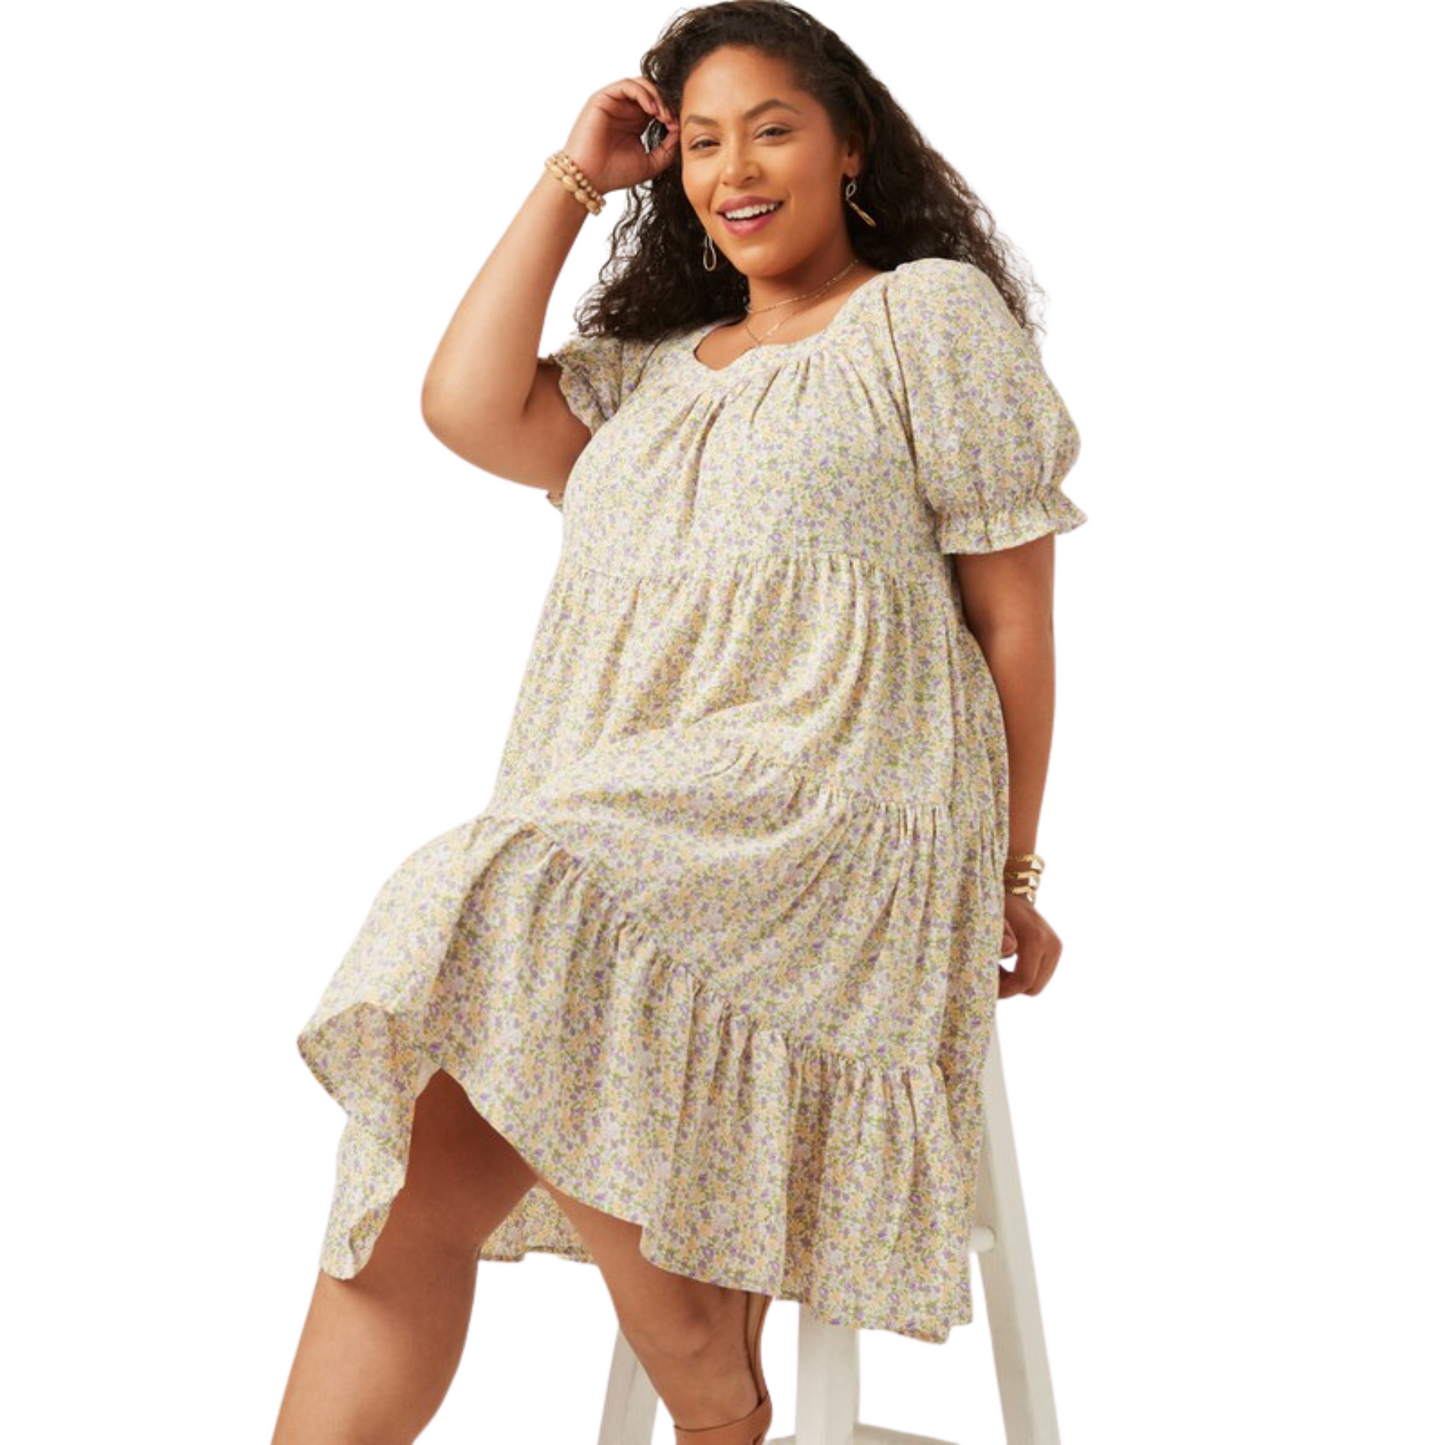 Make a statement with the Ditsy Floral Tiered Dress. It features a romantic print with a flattering off white color, plus size design, and full tiers for a beautiful look. Perfect for special occasions or an everyday style.